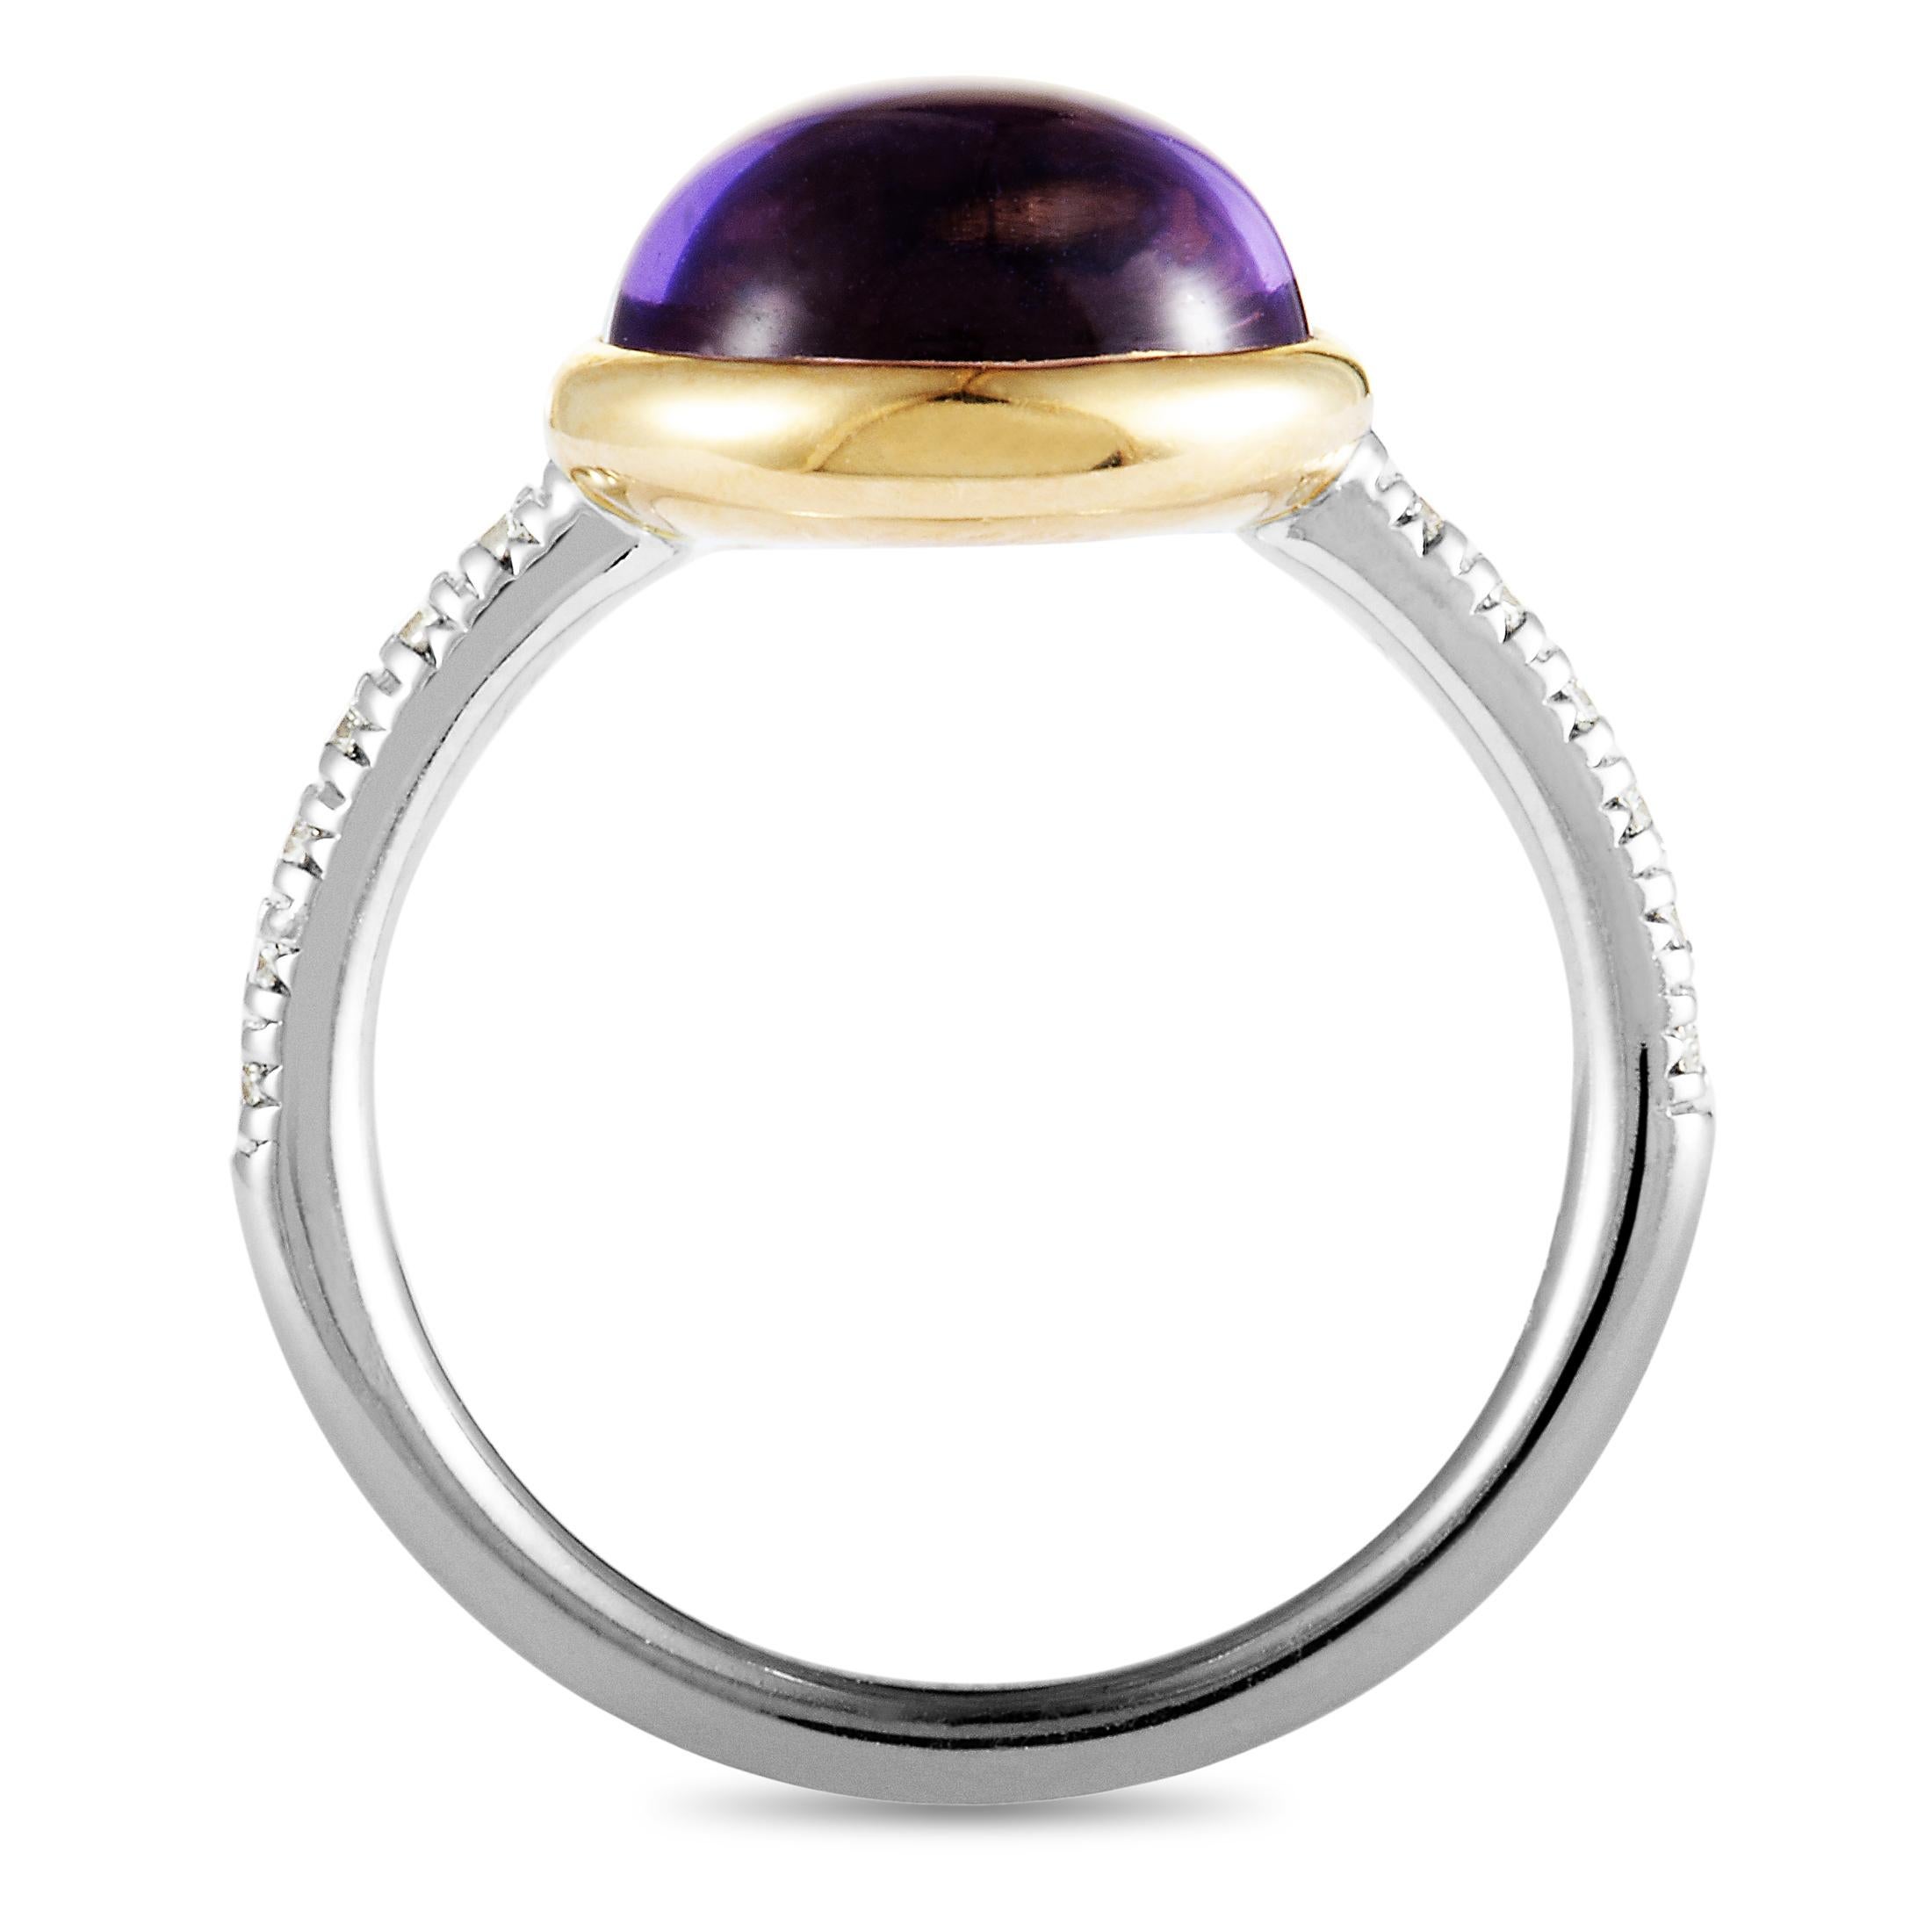 This aesthetically pleasing and beautifully designed ring is gorgeously made by Mimi Milano. The elegant ring is stunningly crafted in 18K rose and white gold and adorned with 0.12ct of glamorous diamonds and a sensational amethyst, weighing